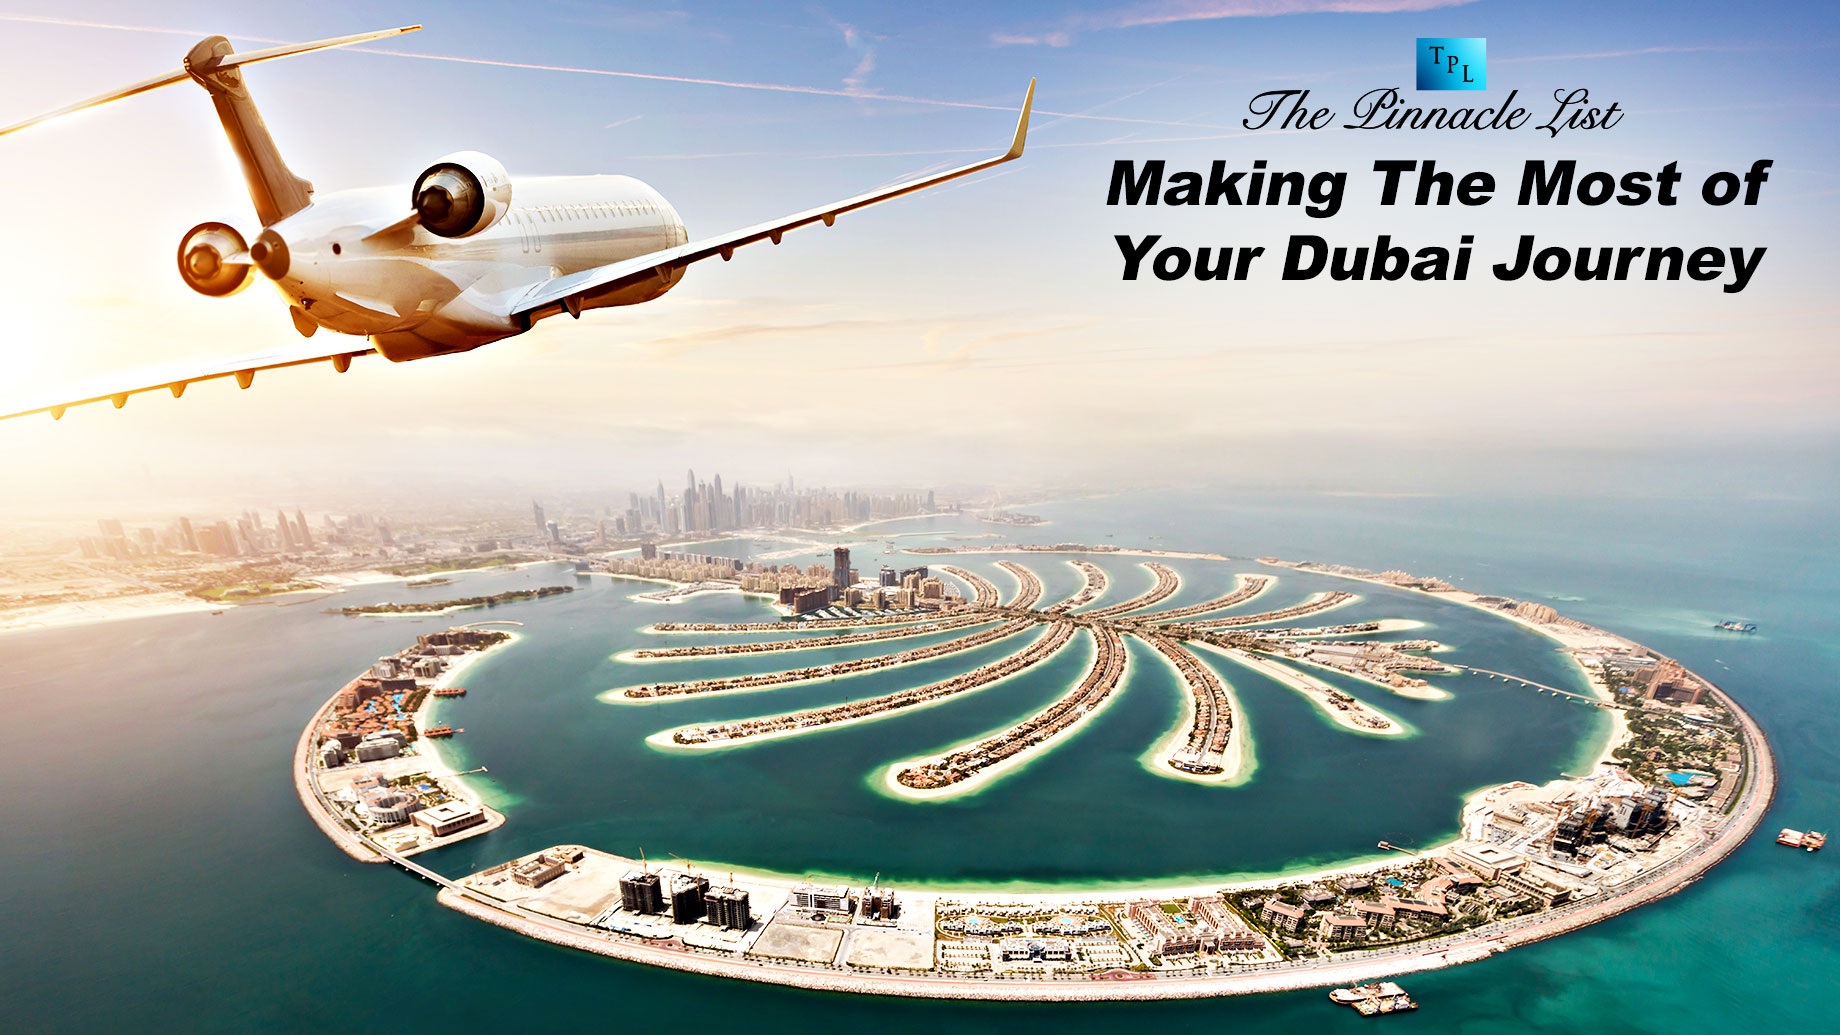 Making The Most of Your Dubai Journey